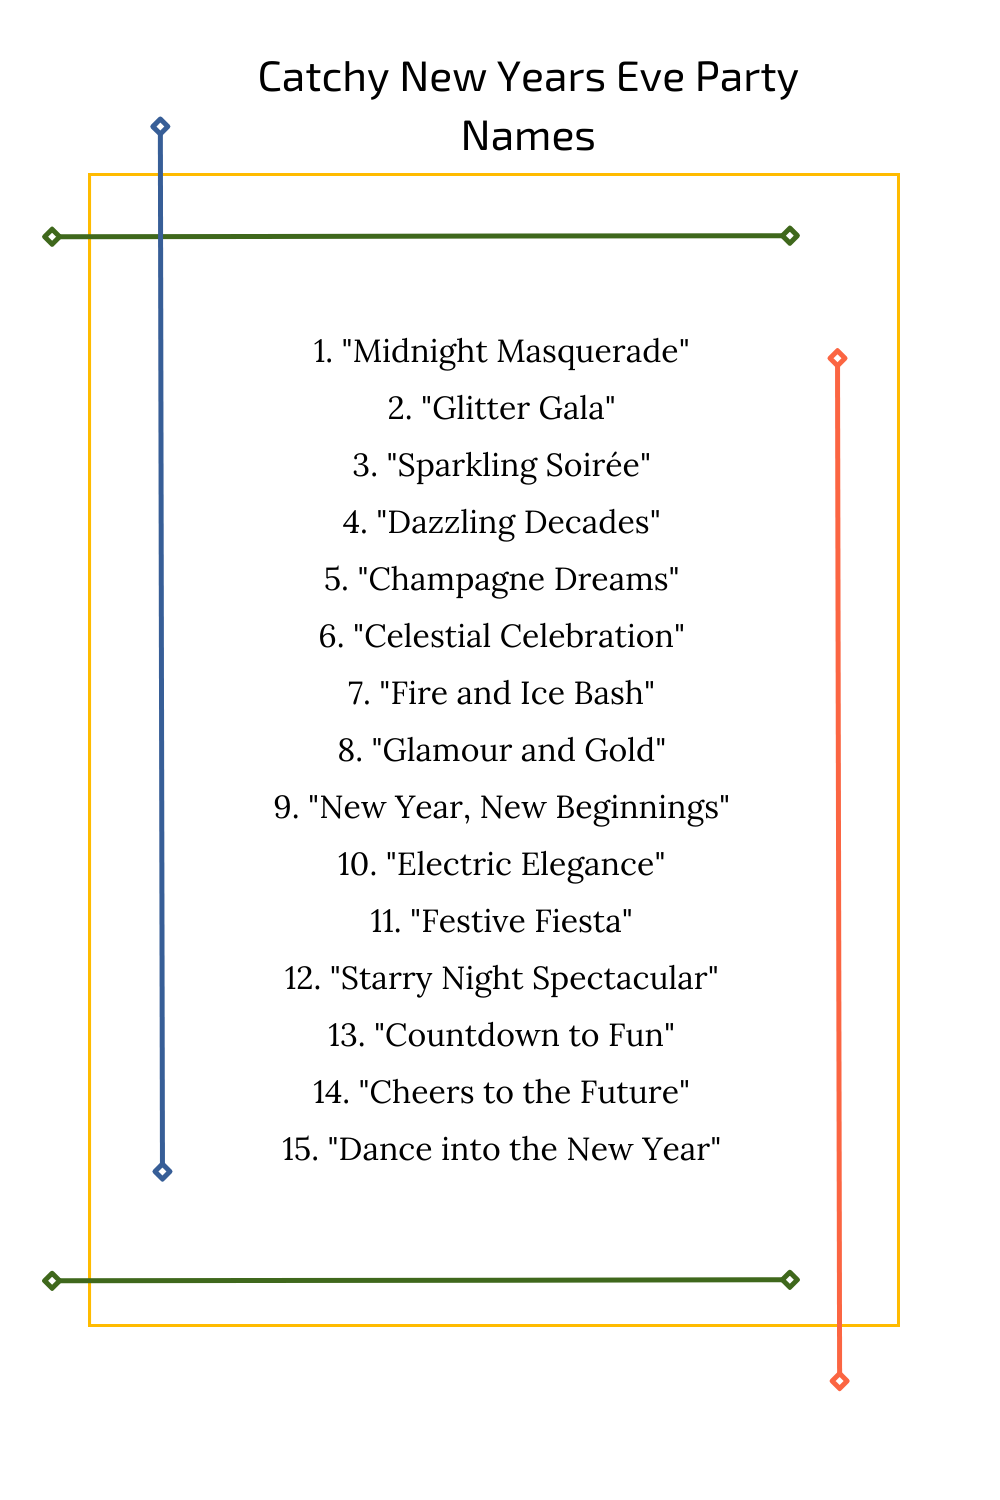 Catchy New Years Eve Party Names